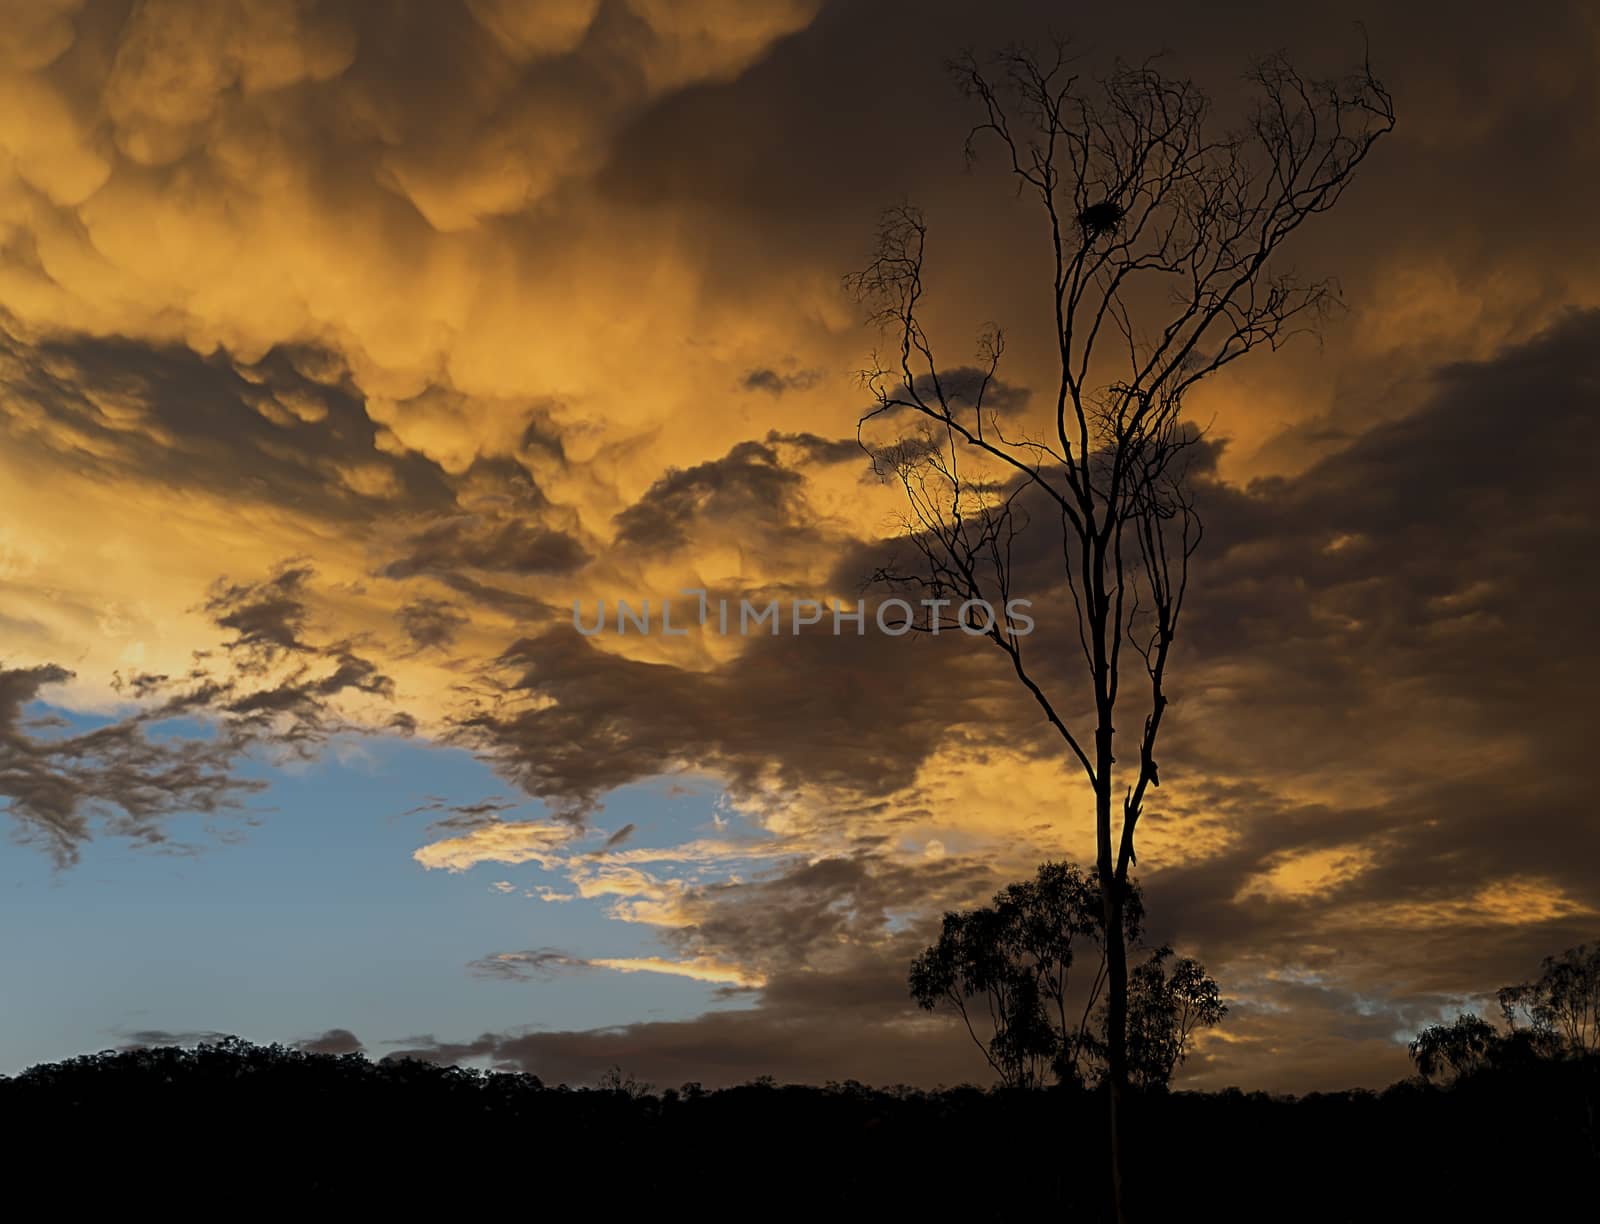 Ominous golden Australian sunset with stormy mammatus clouds and eucalyptus gumtree silhouette